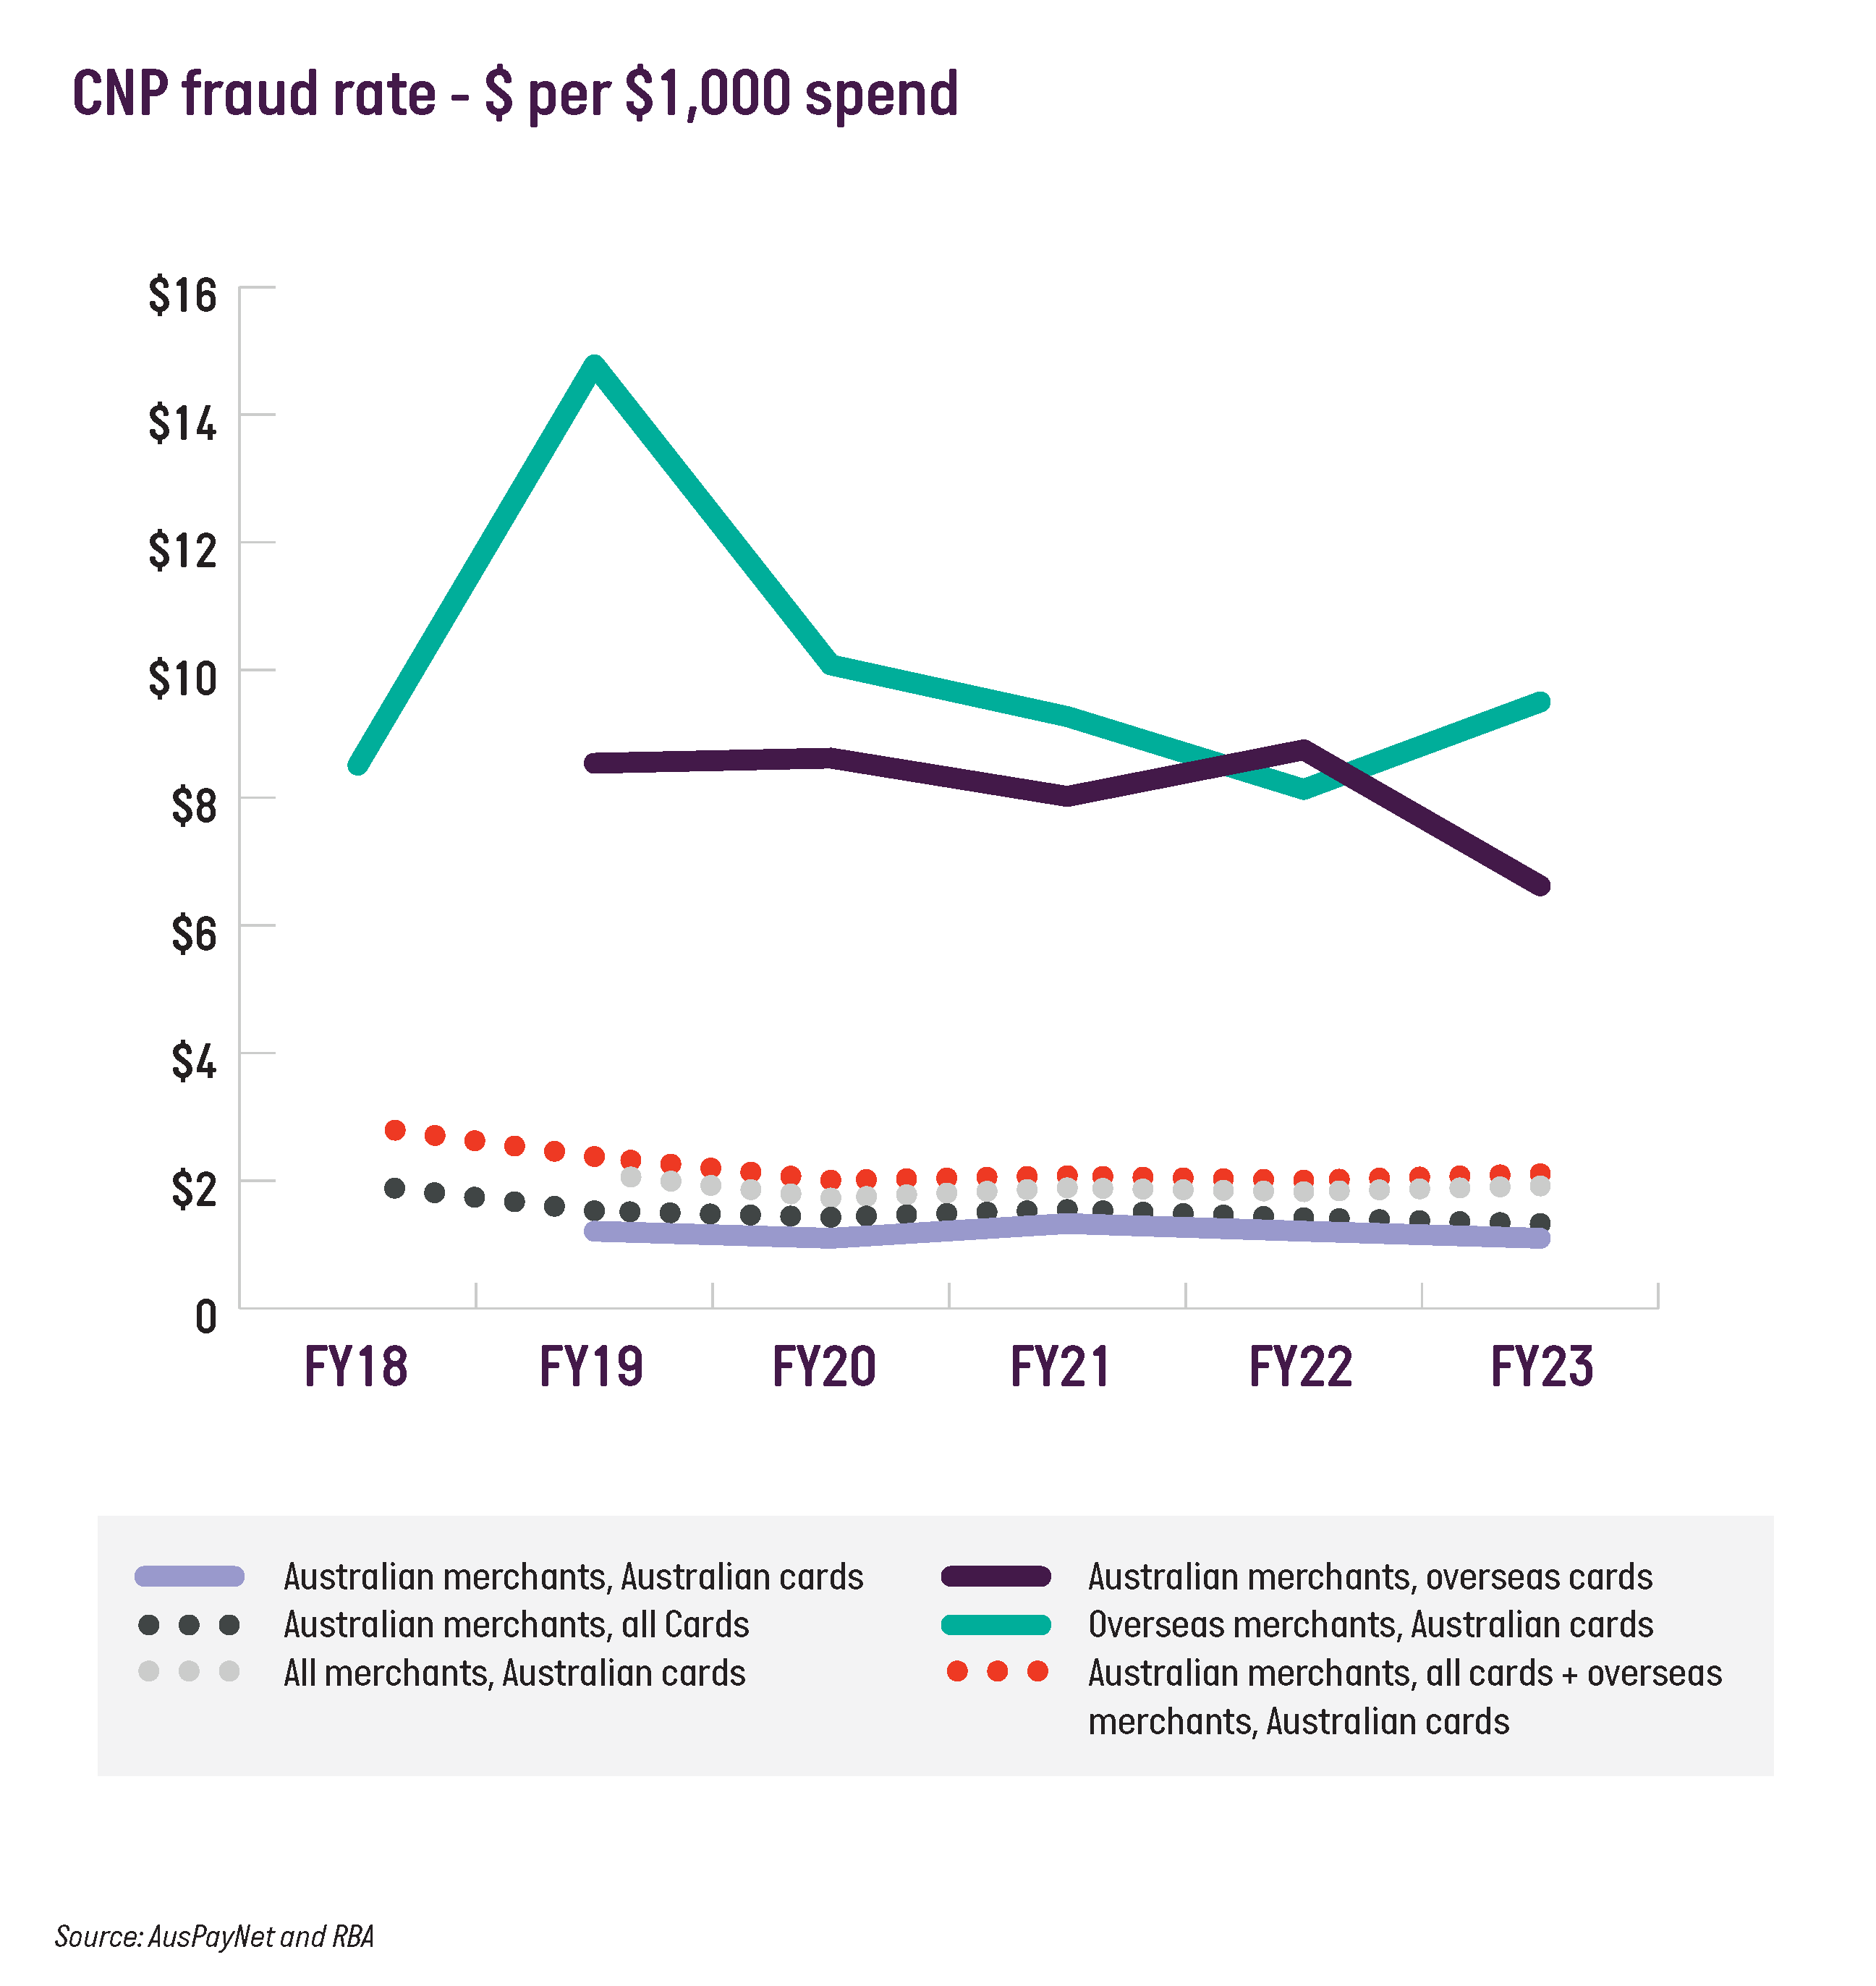 CNP fraud rate - $ per $1,000 spend